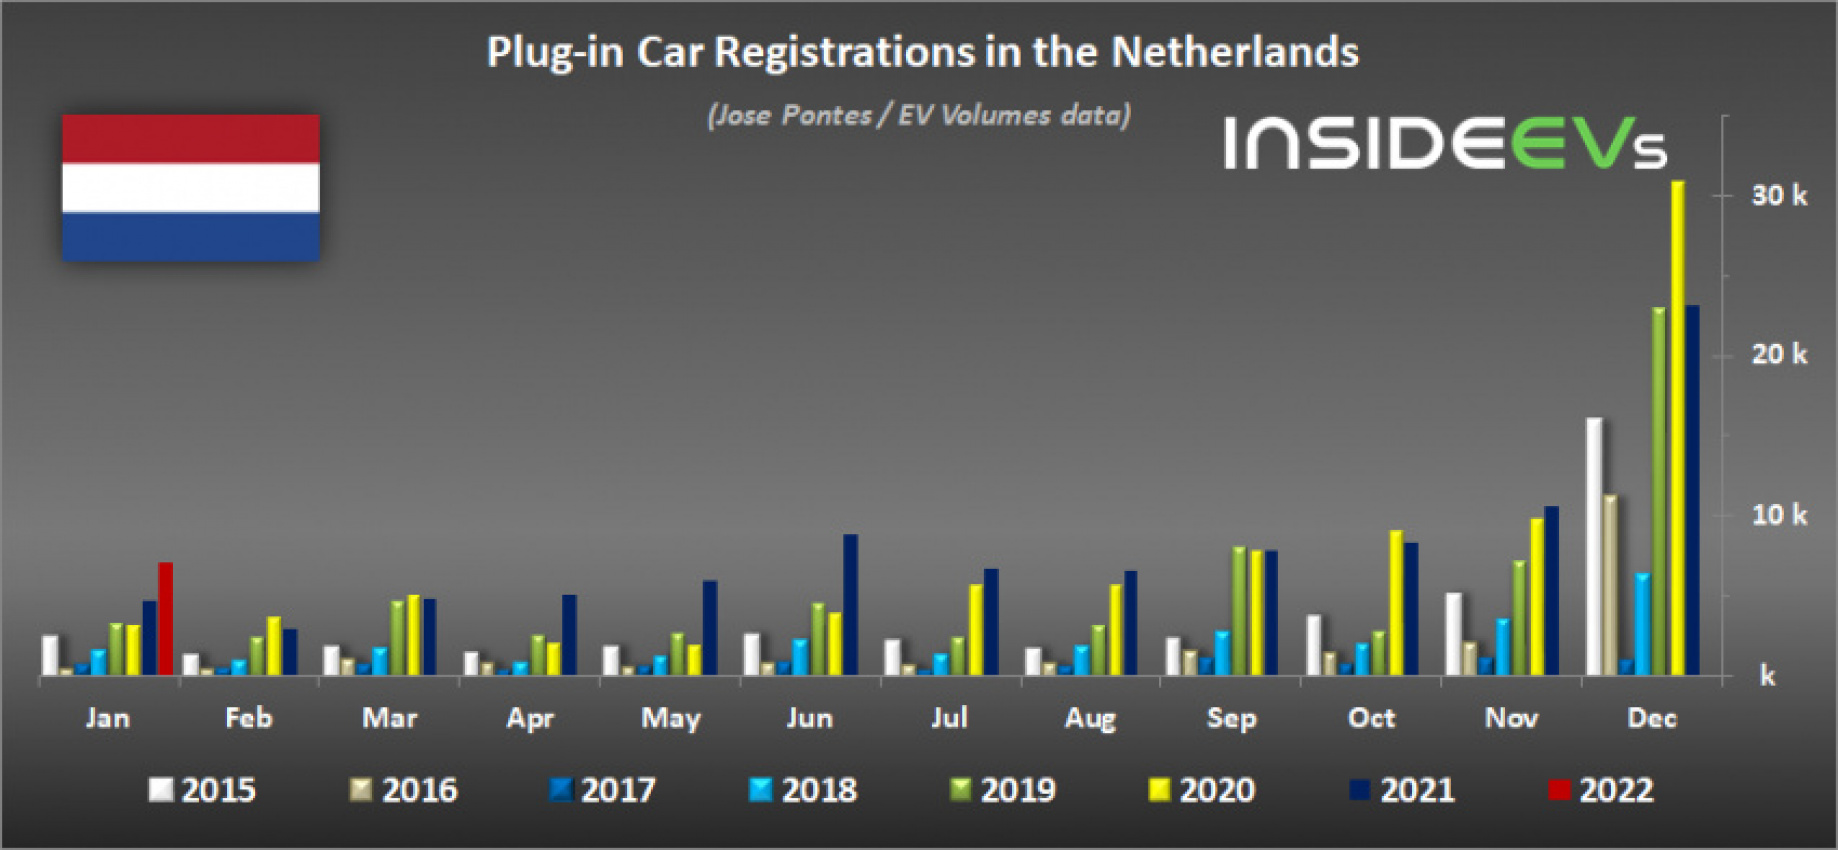 autos, cars, evs, geely, volvo, netherlands: january brings a 100% geely-volvo plug-in podium finish